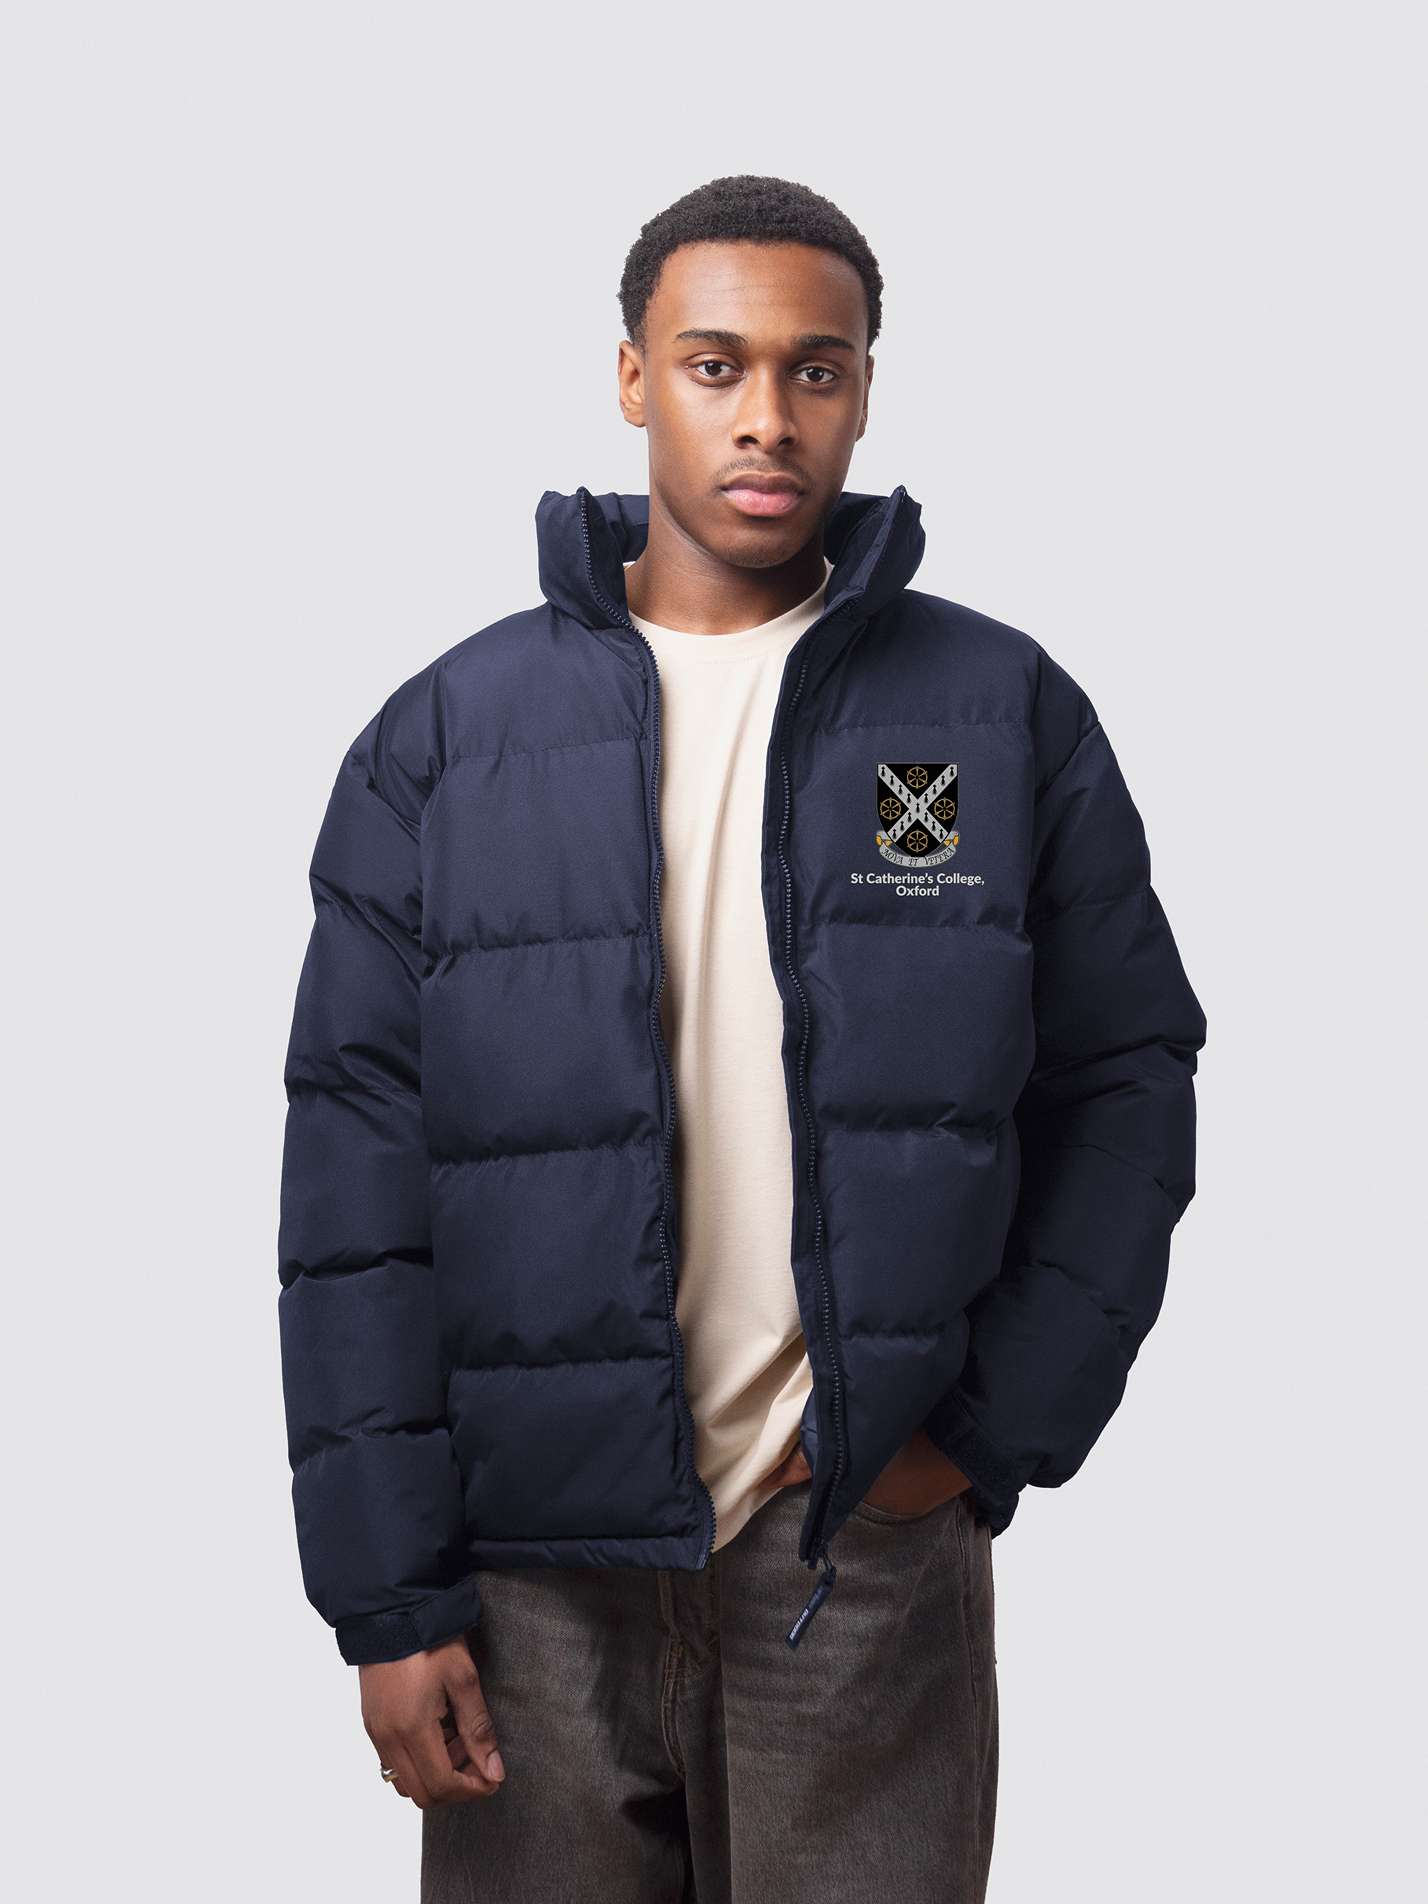 Navy Oxford University puffer jacket, with embroidery on the left chest